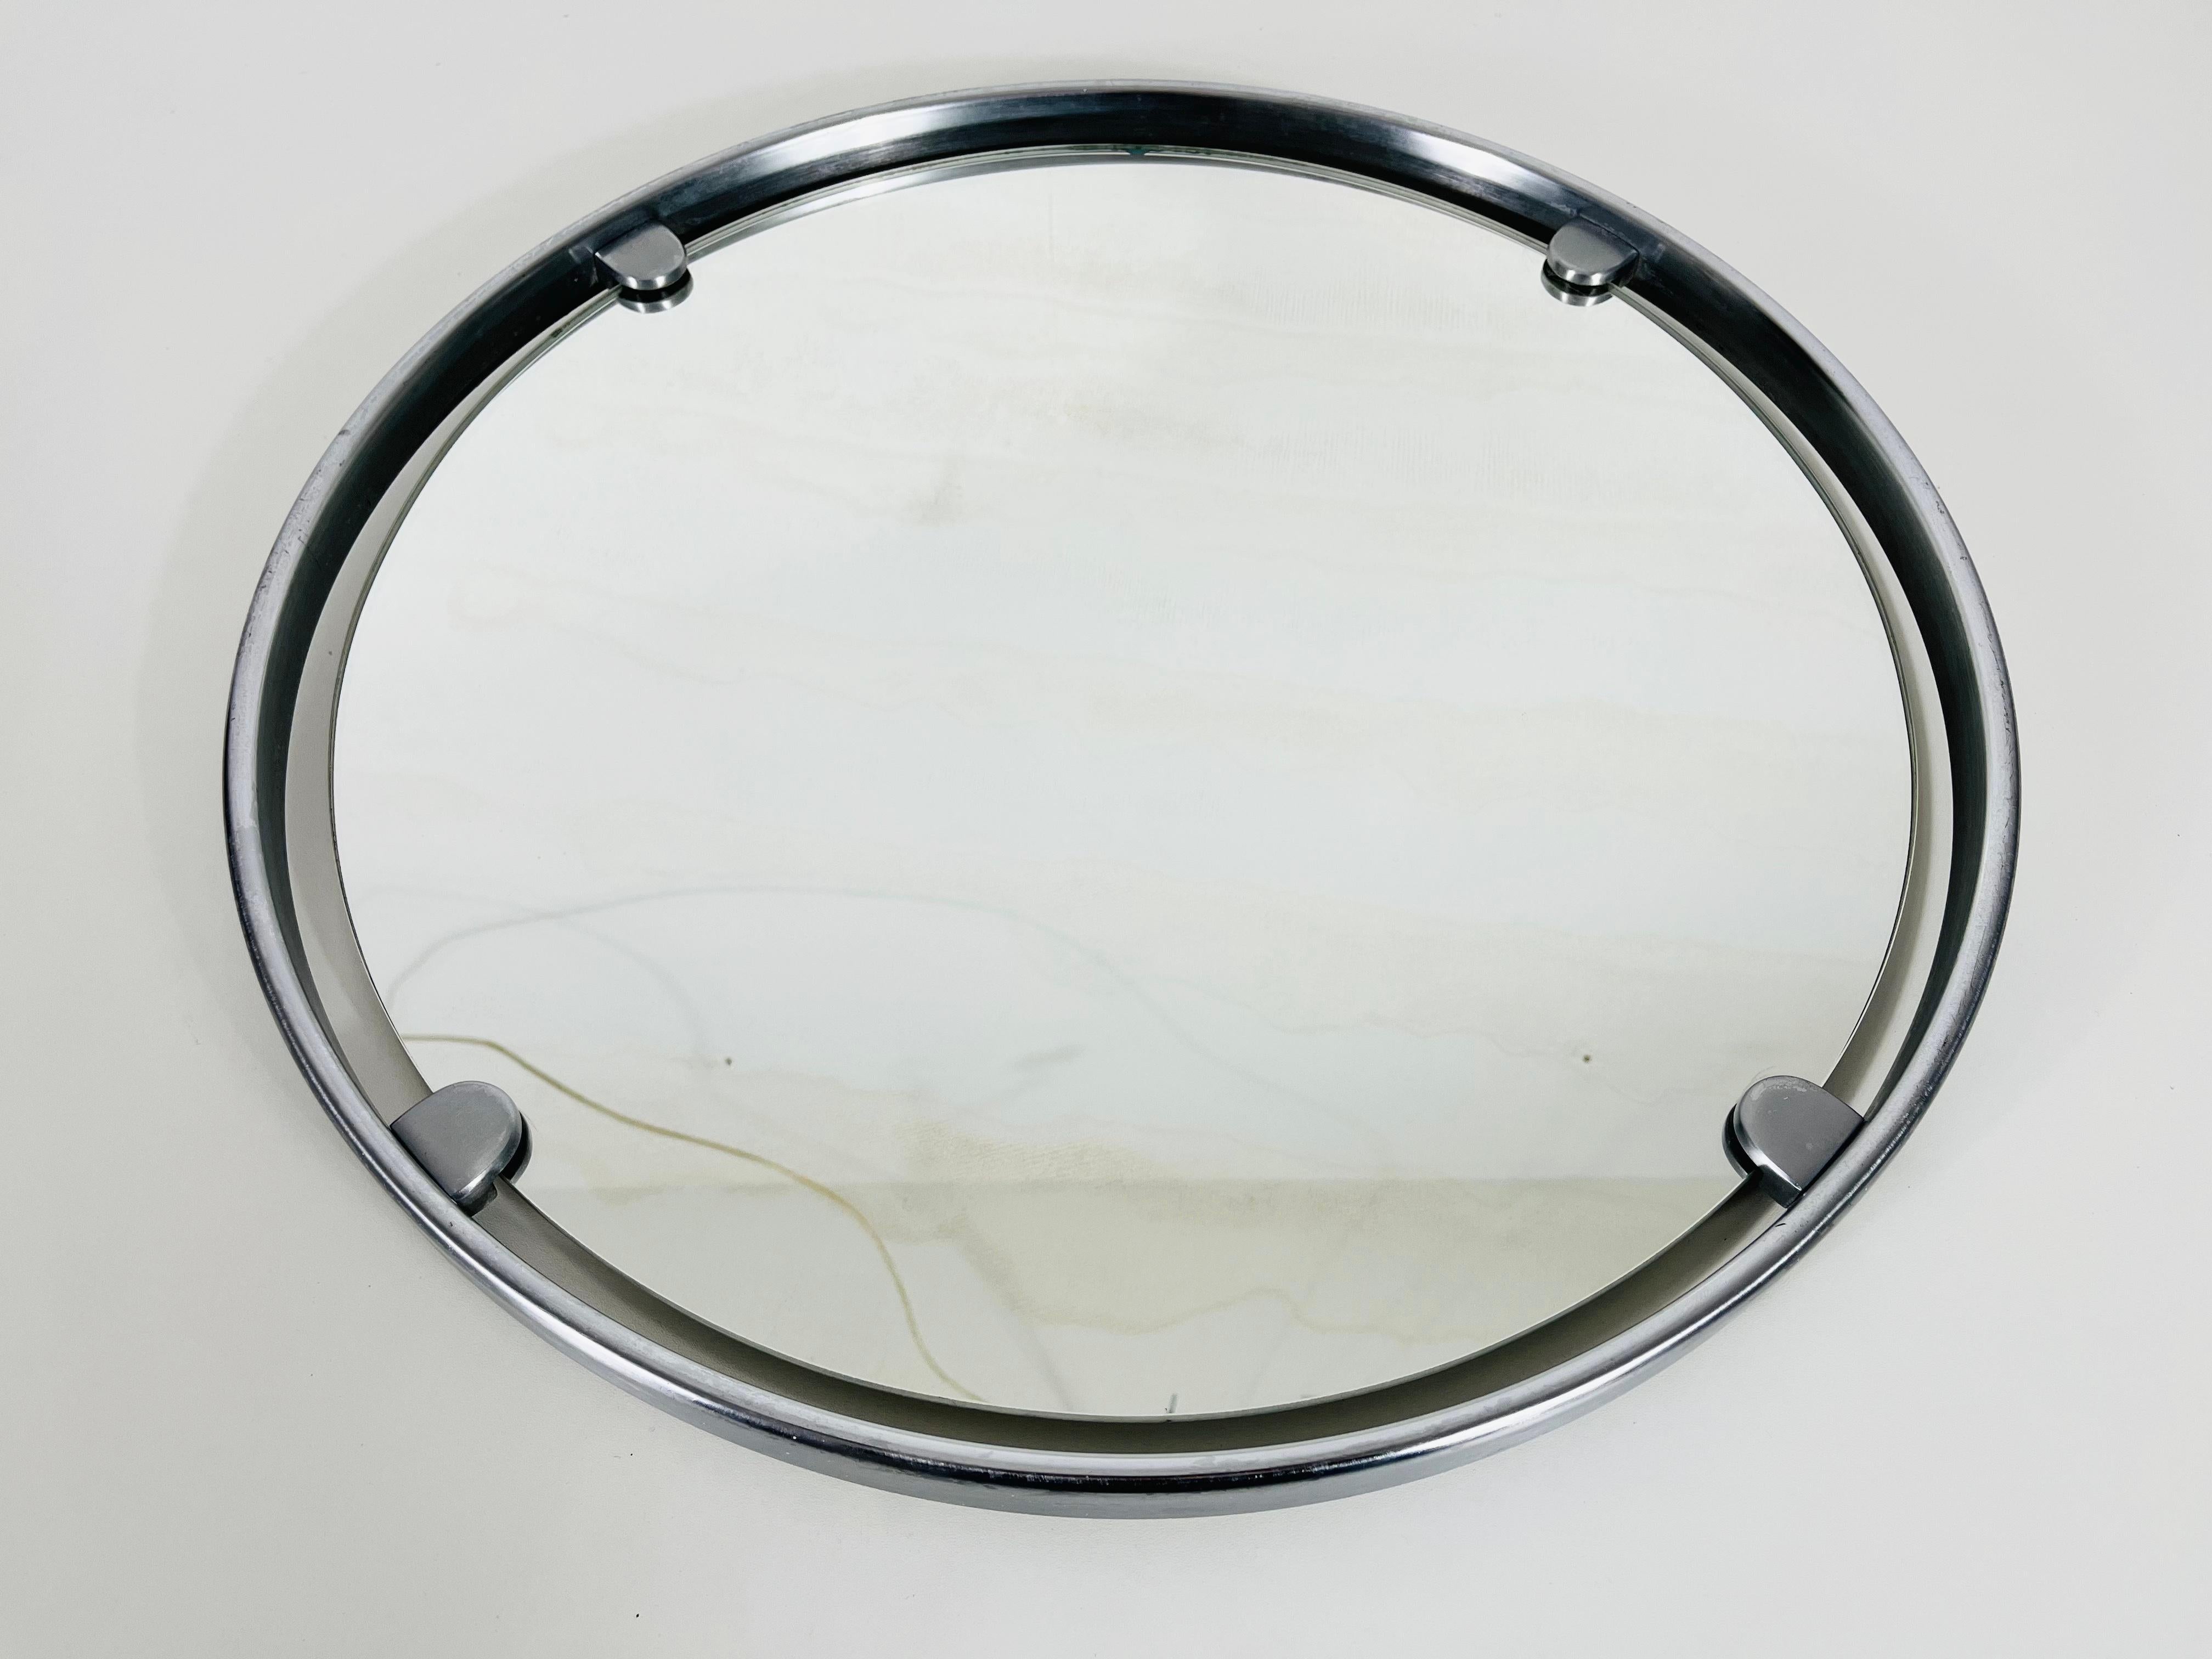 A heavy Hillebrand wall mirror from the 1960s made in Germany. The mirror has a round metal design. The aluminium made mirror is in a good vintage condition.

Free worldwide express shipping.